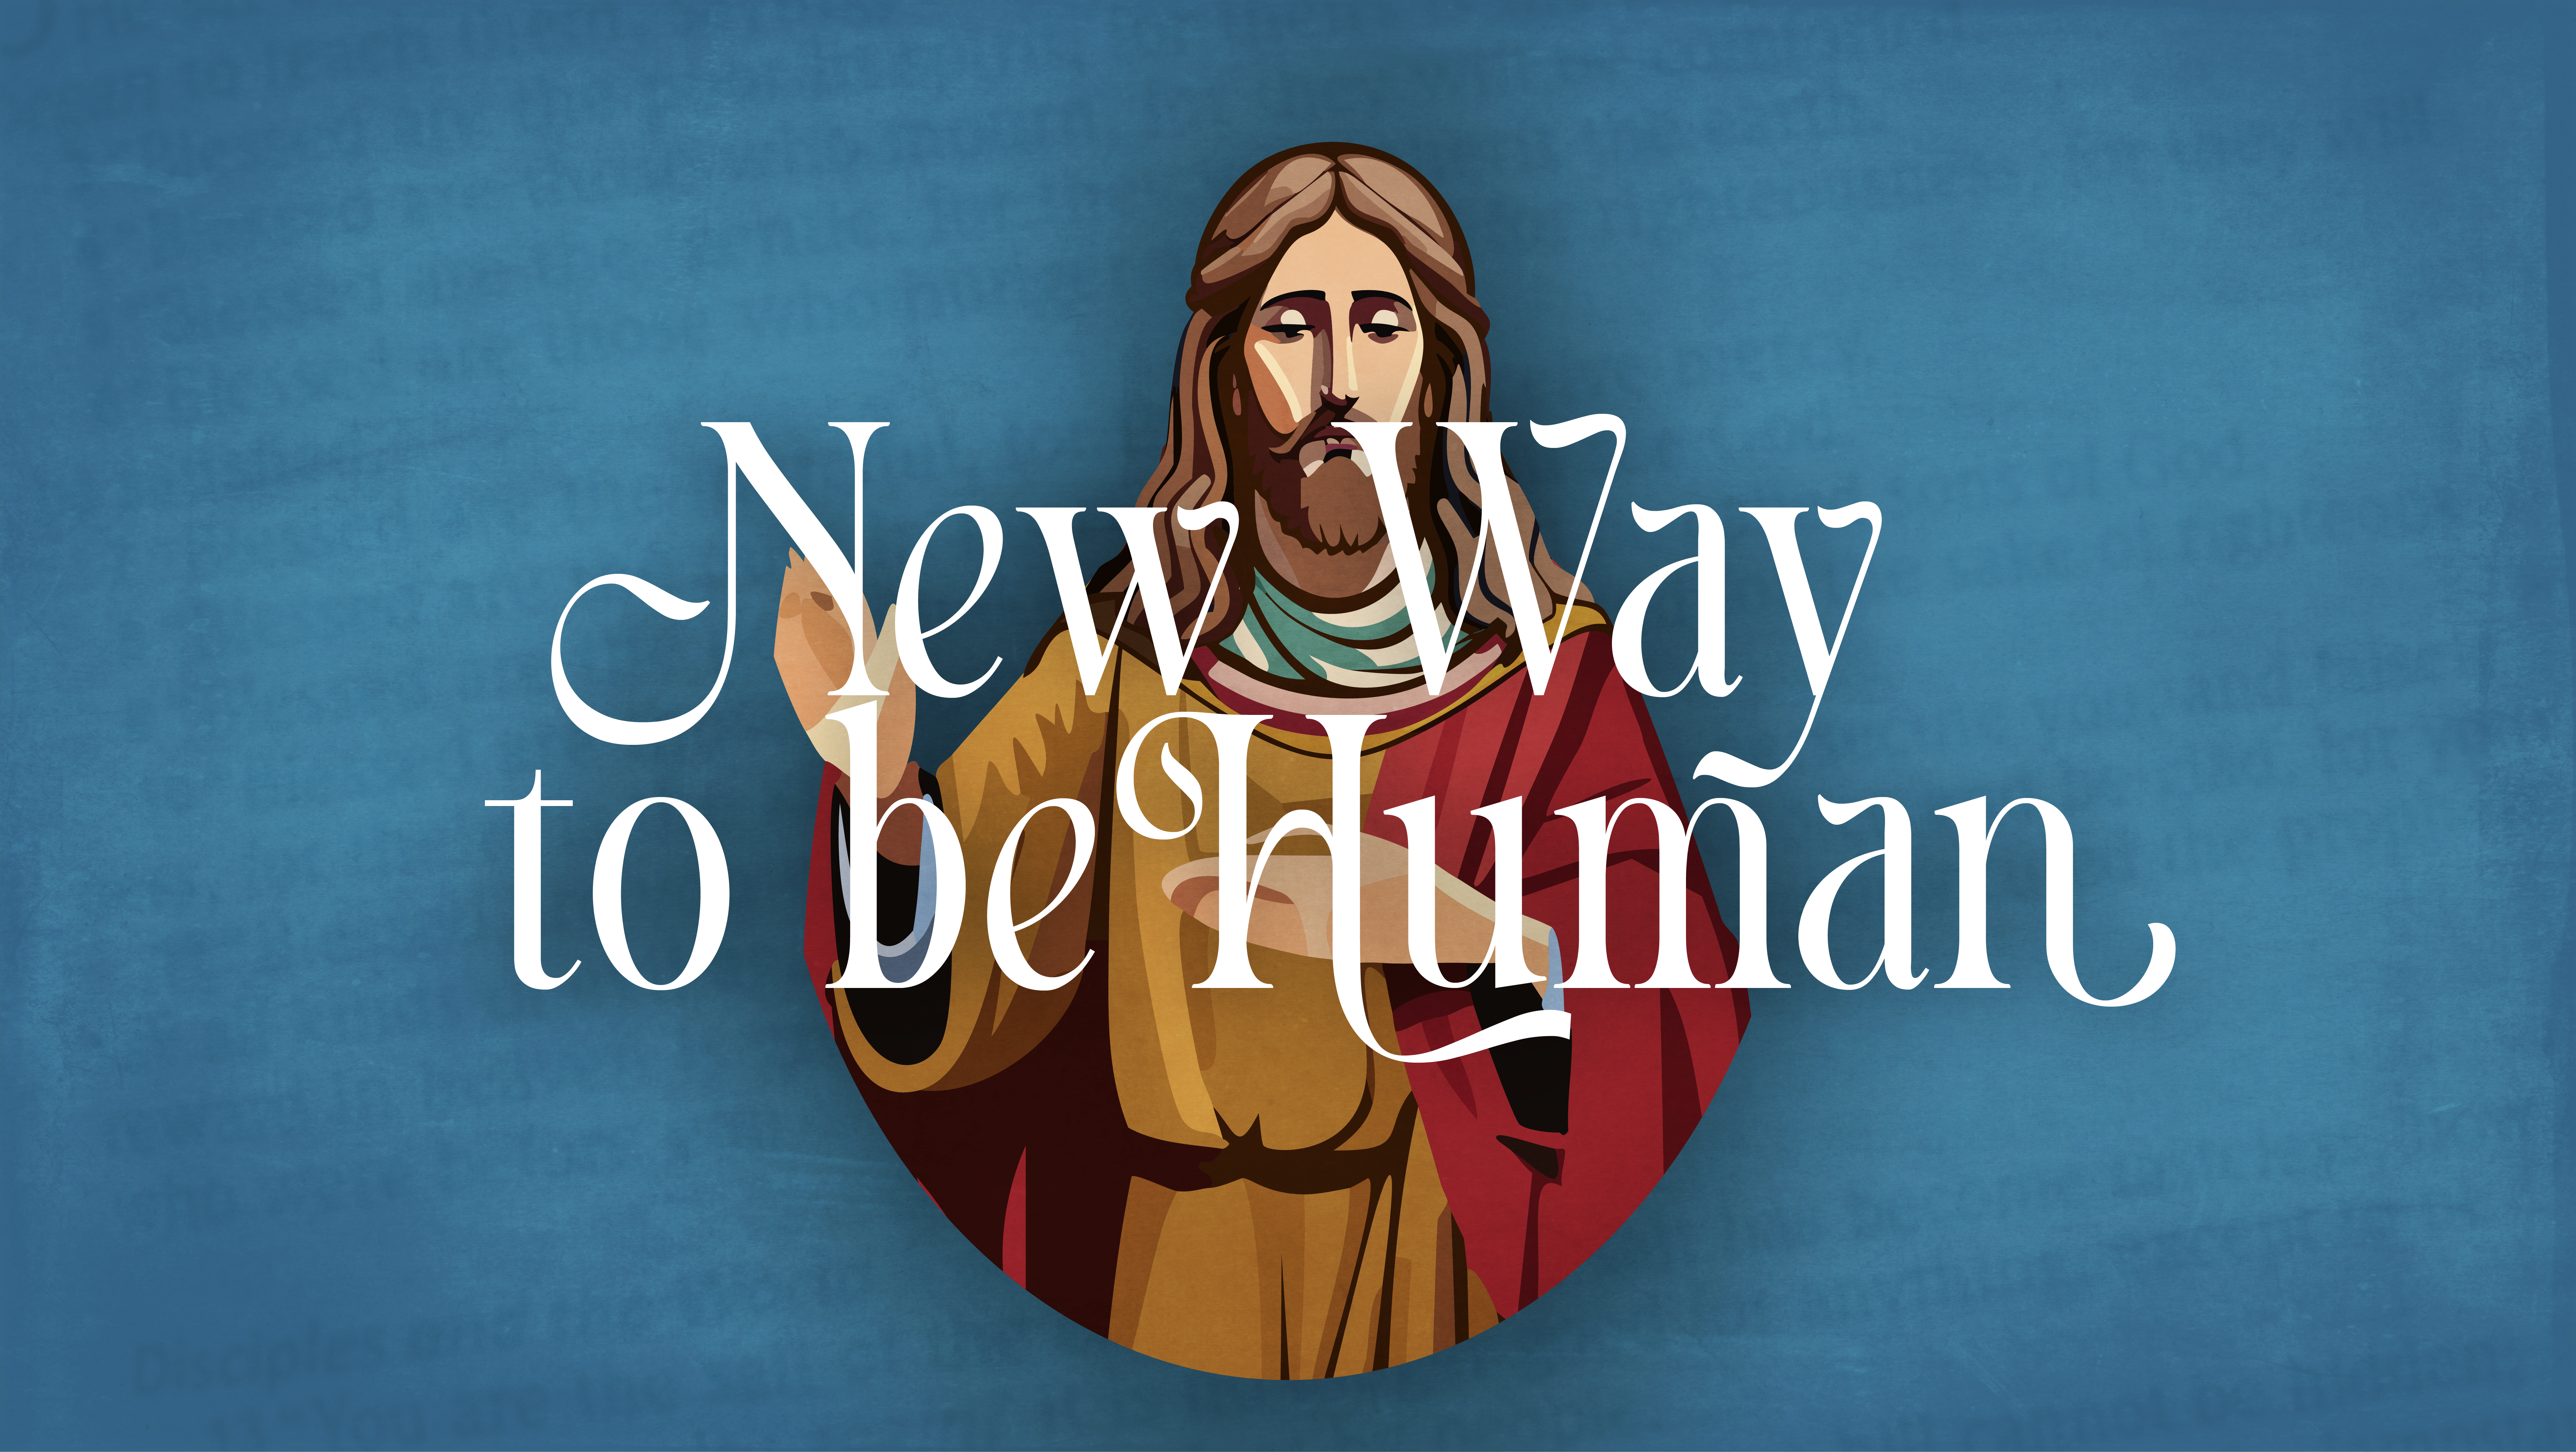 New Way to be Human banner